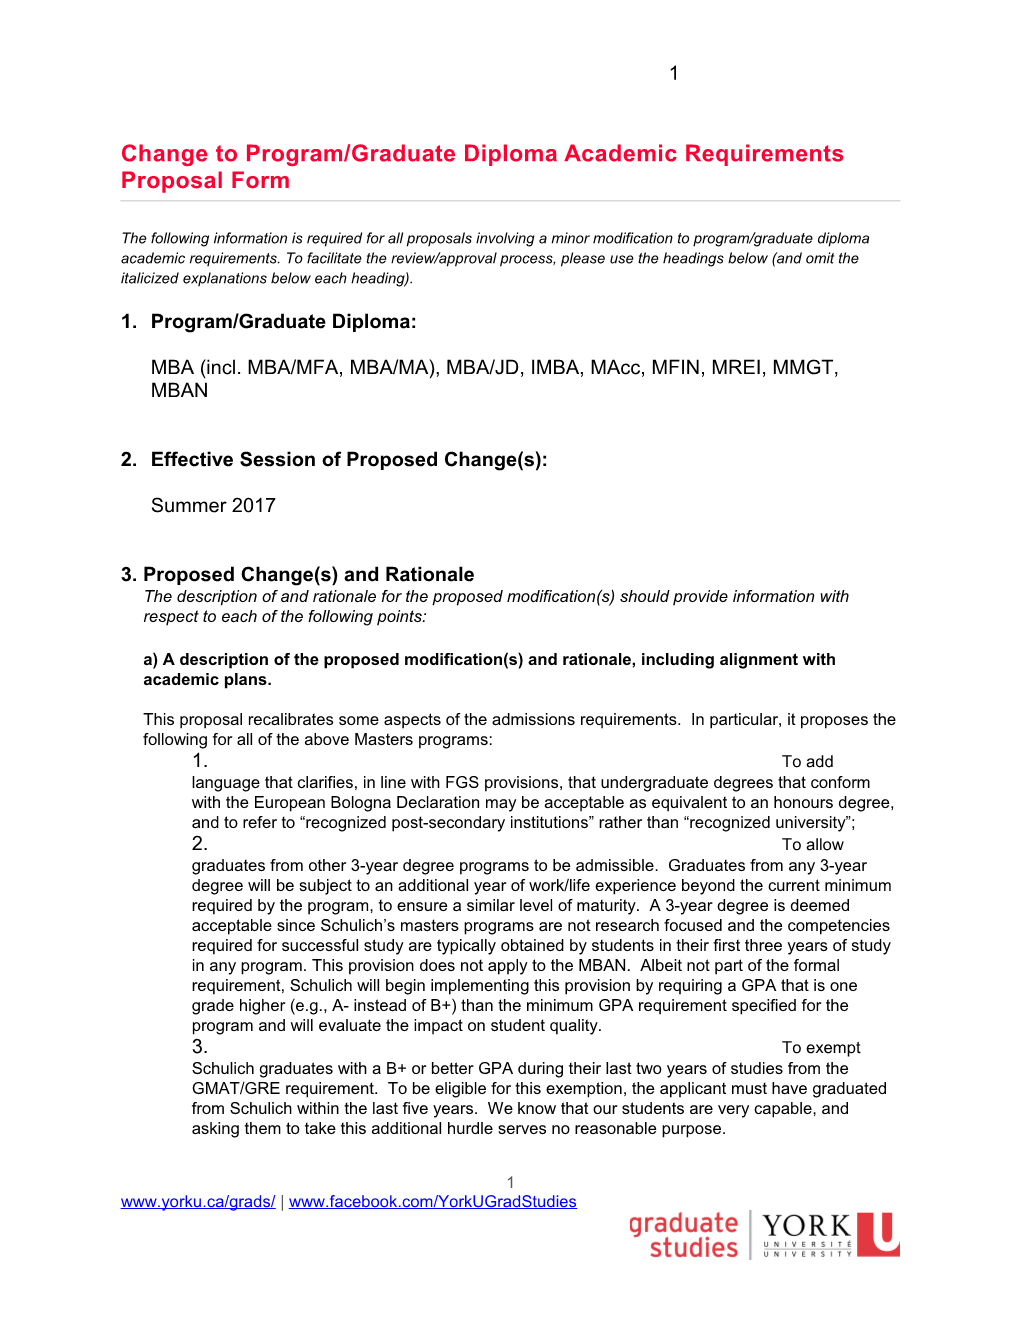 Change to Program/Graduate Diploma Academic Requirements Proposal Form